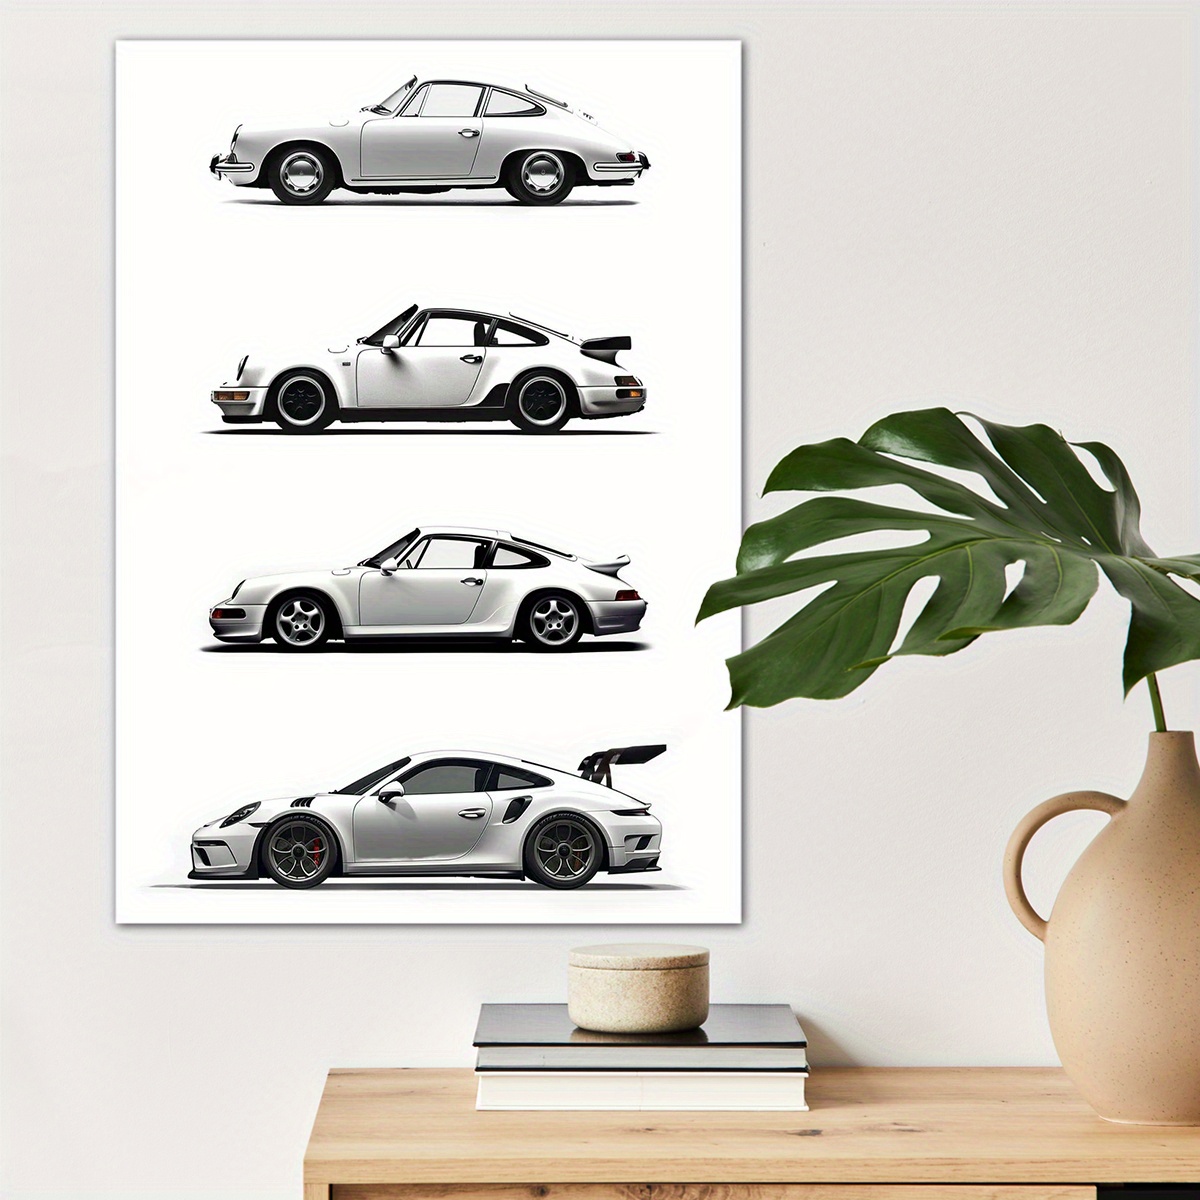 

1pc Wall Art For Home Decor, Car Lovers Poster Wall Decor Roadster Canvas Prints For Living Room Bedroom Kitchen Office Cafe Decor, Perfect Gift And Decoration